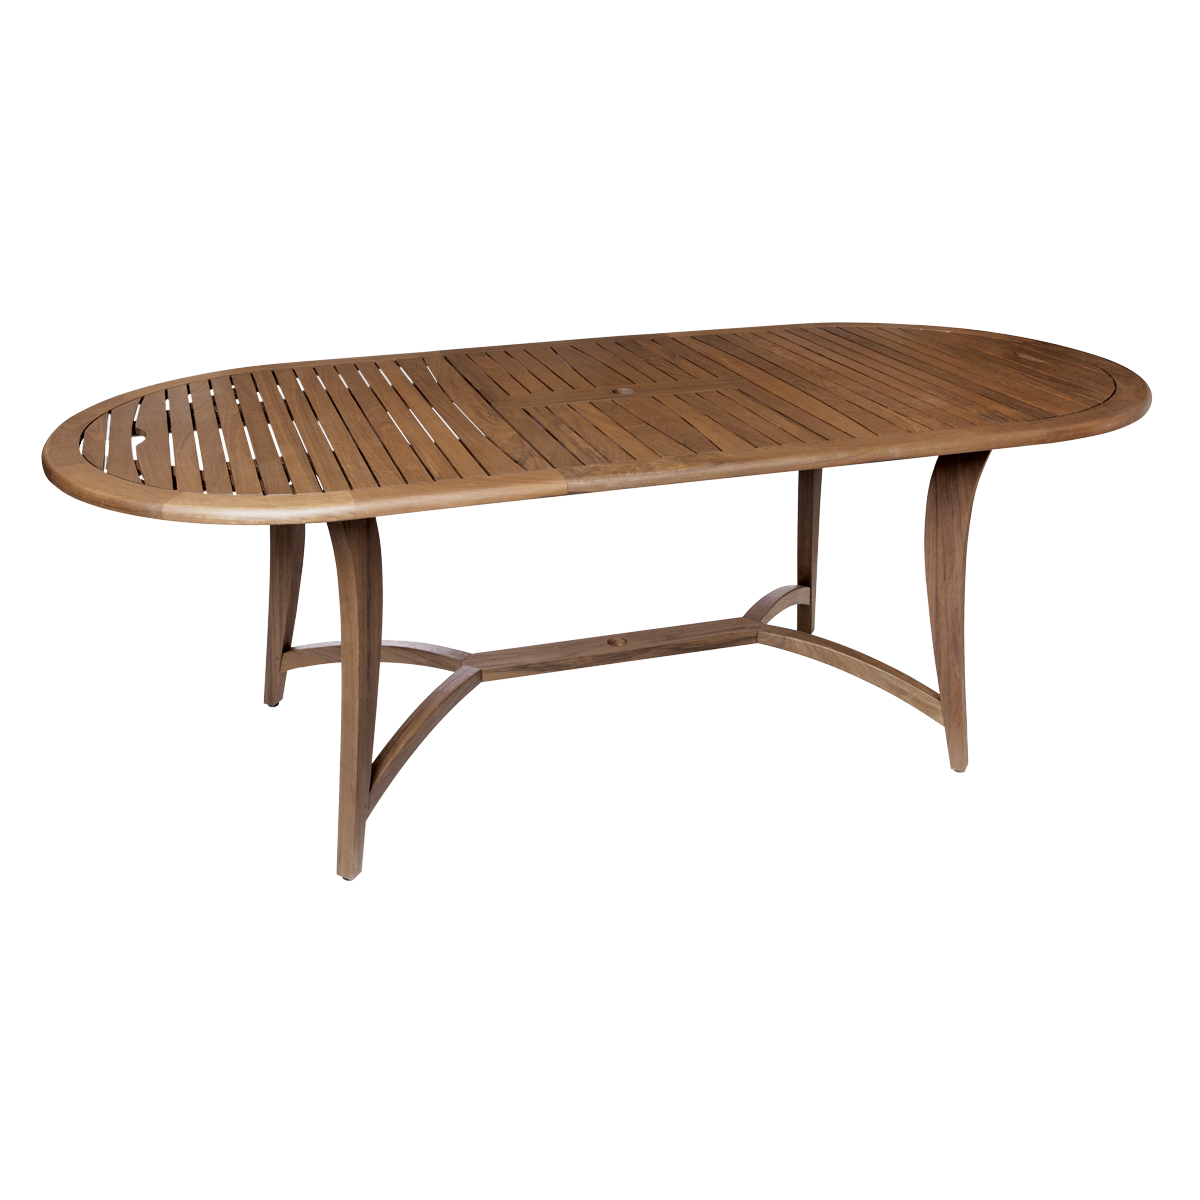 Topaz 65-87" Oval Butterfly Extension Dining Table